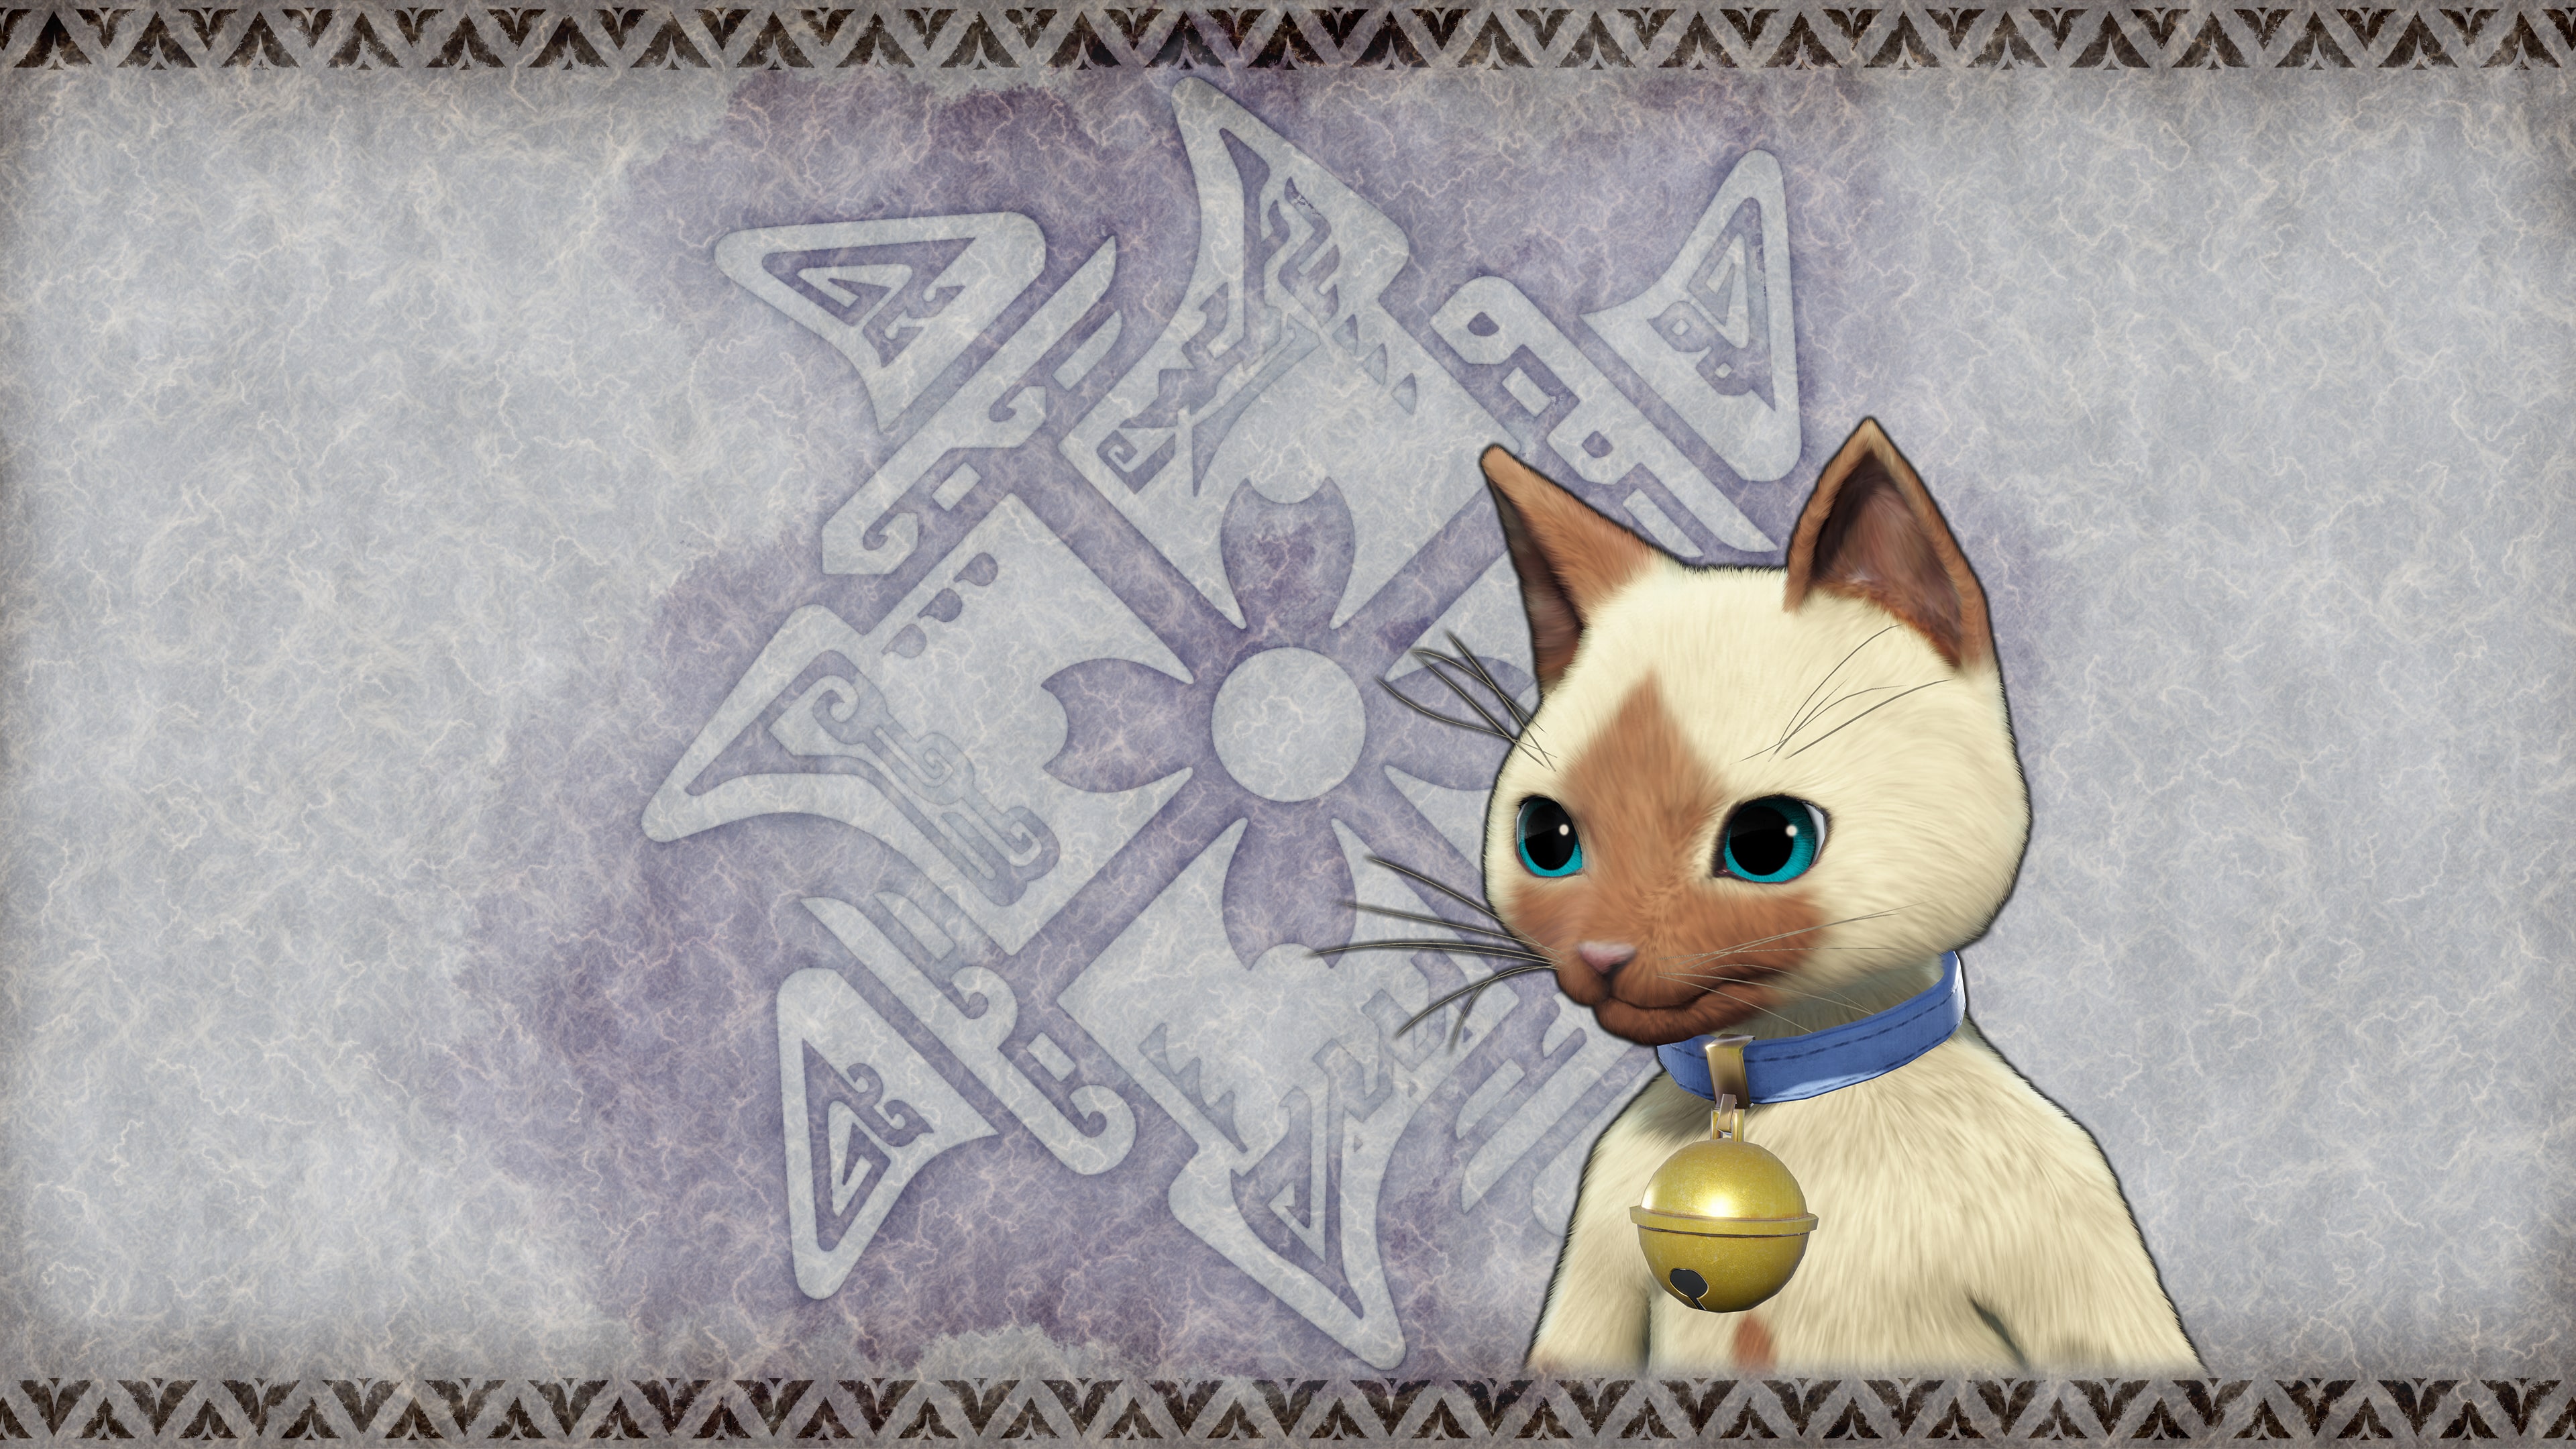 Monster Hunter Rise - "Bell Collar" Palico layered armor piece